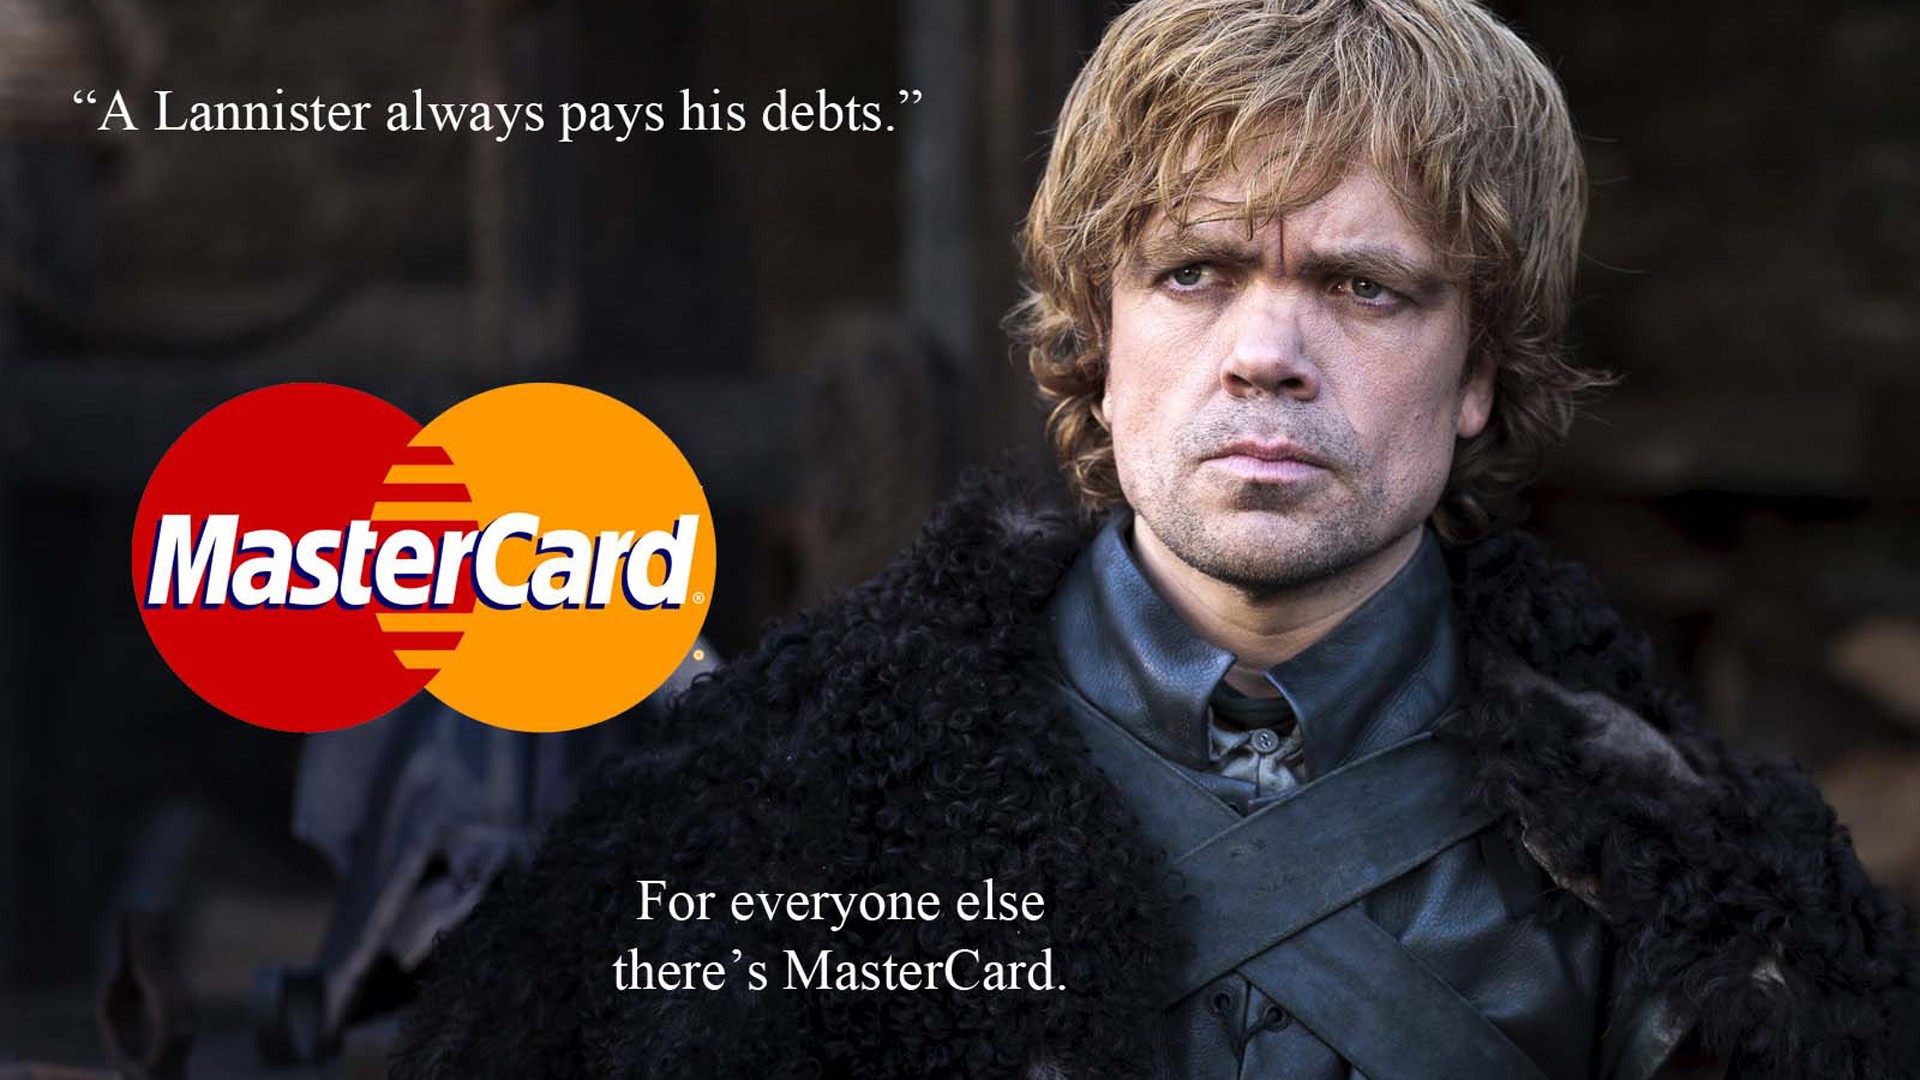 Game Of Thrones Humor Tyrion Lannister Peter Dinklage Quote Advertisements Crossover 1920x1080